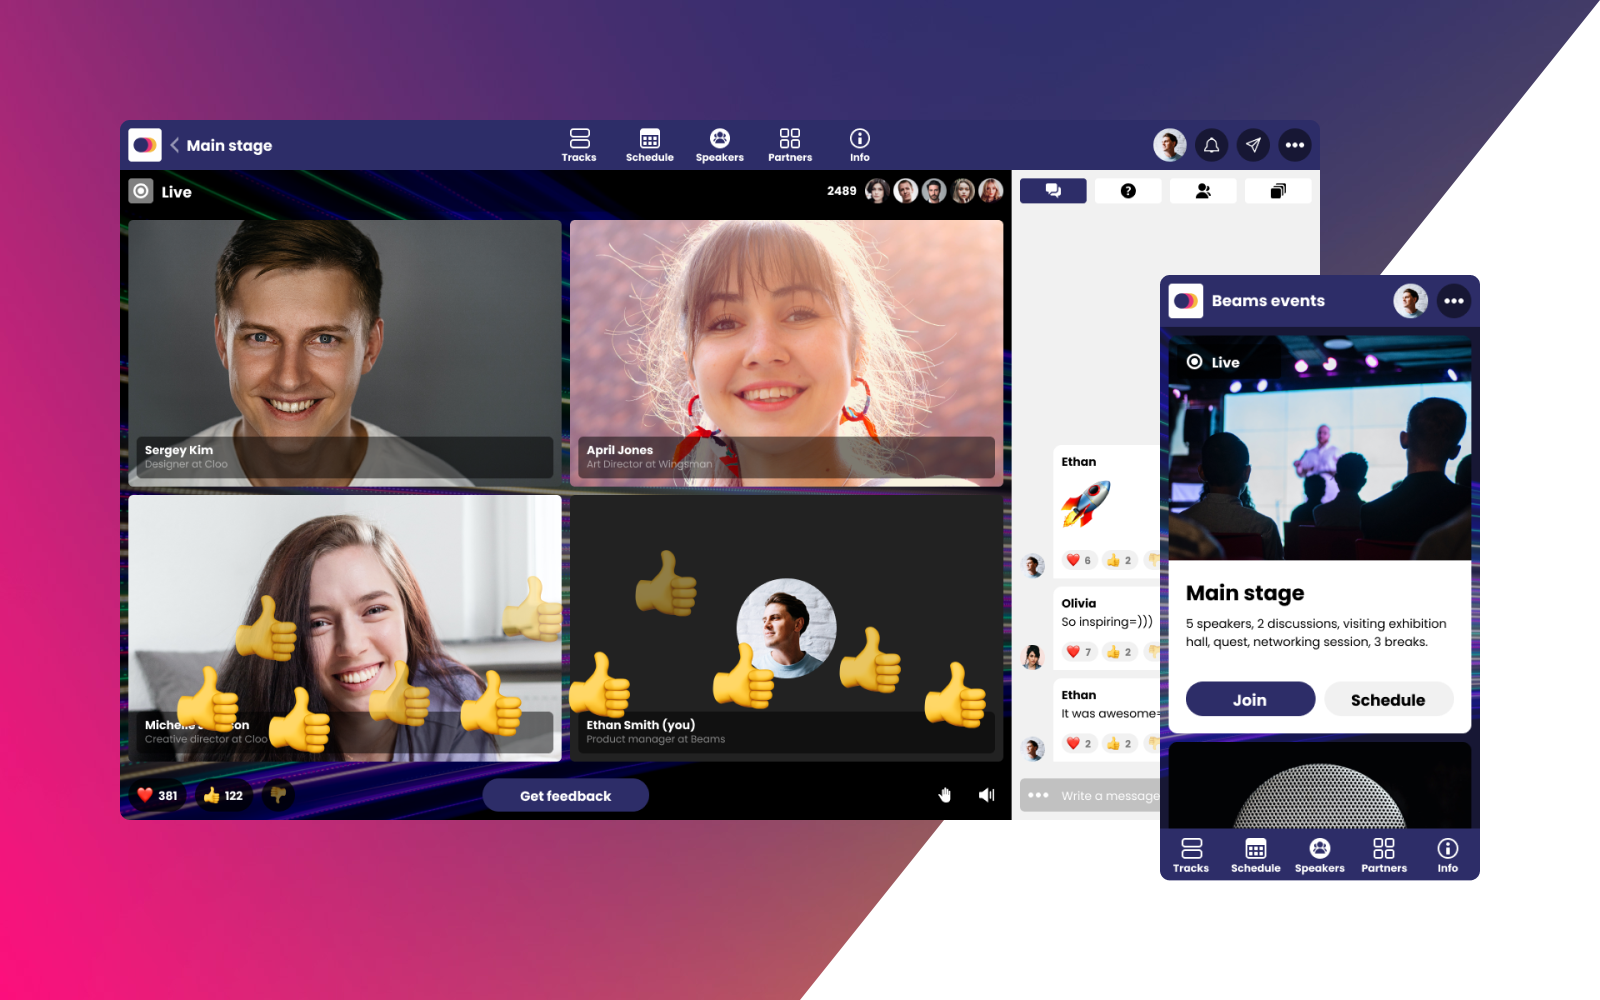 High quality FullHD streaming, several speakers live at once. There is an option of screen sharing for all the viewers. There is an option to write comments or questions in the chat, and react (love, like, dislike).Available on desktop and mobile.